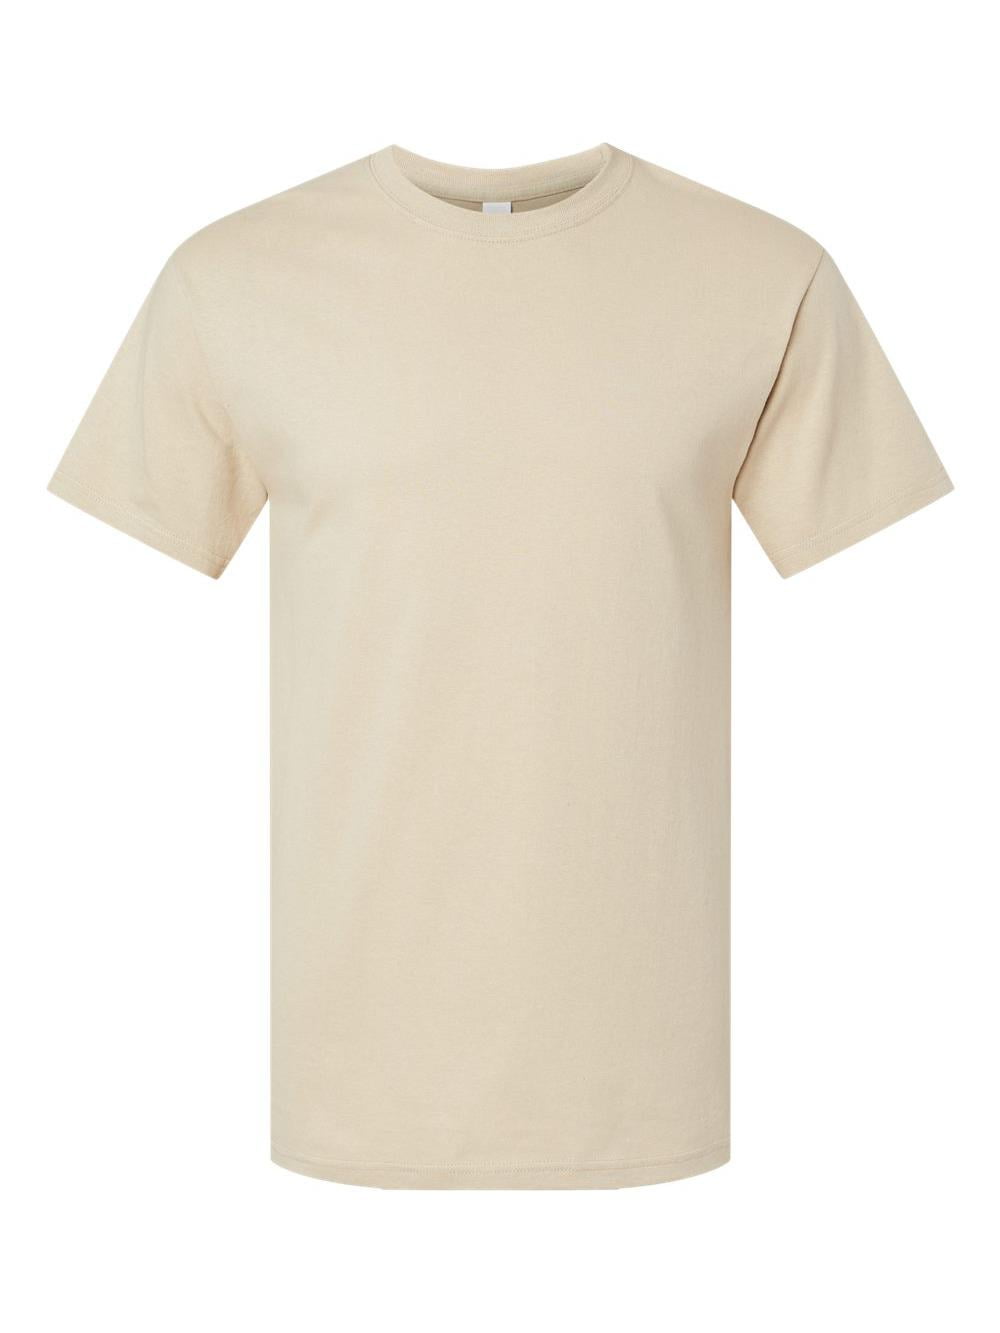 M&O - Gold Soft Touch T-Shirt - 4800 - Sand - Size: L 